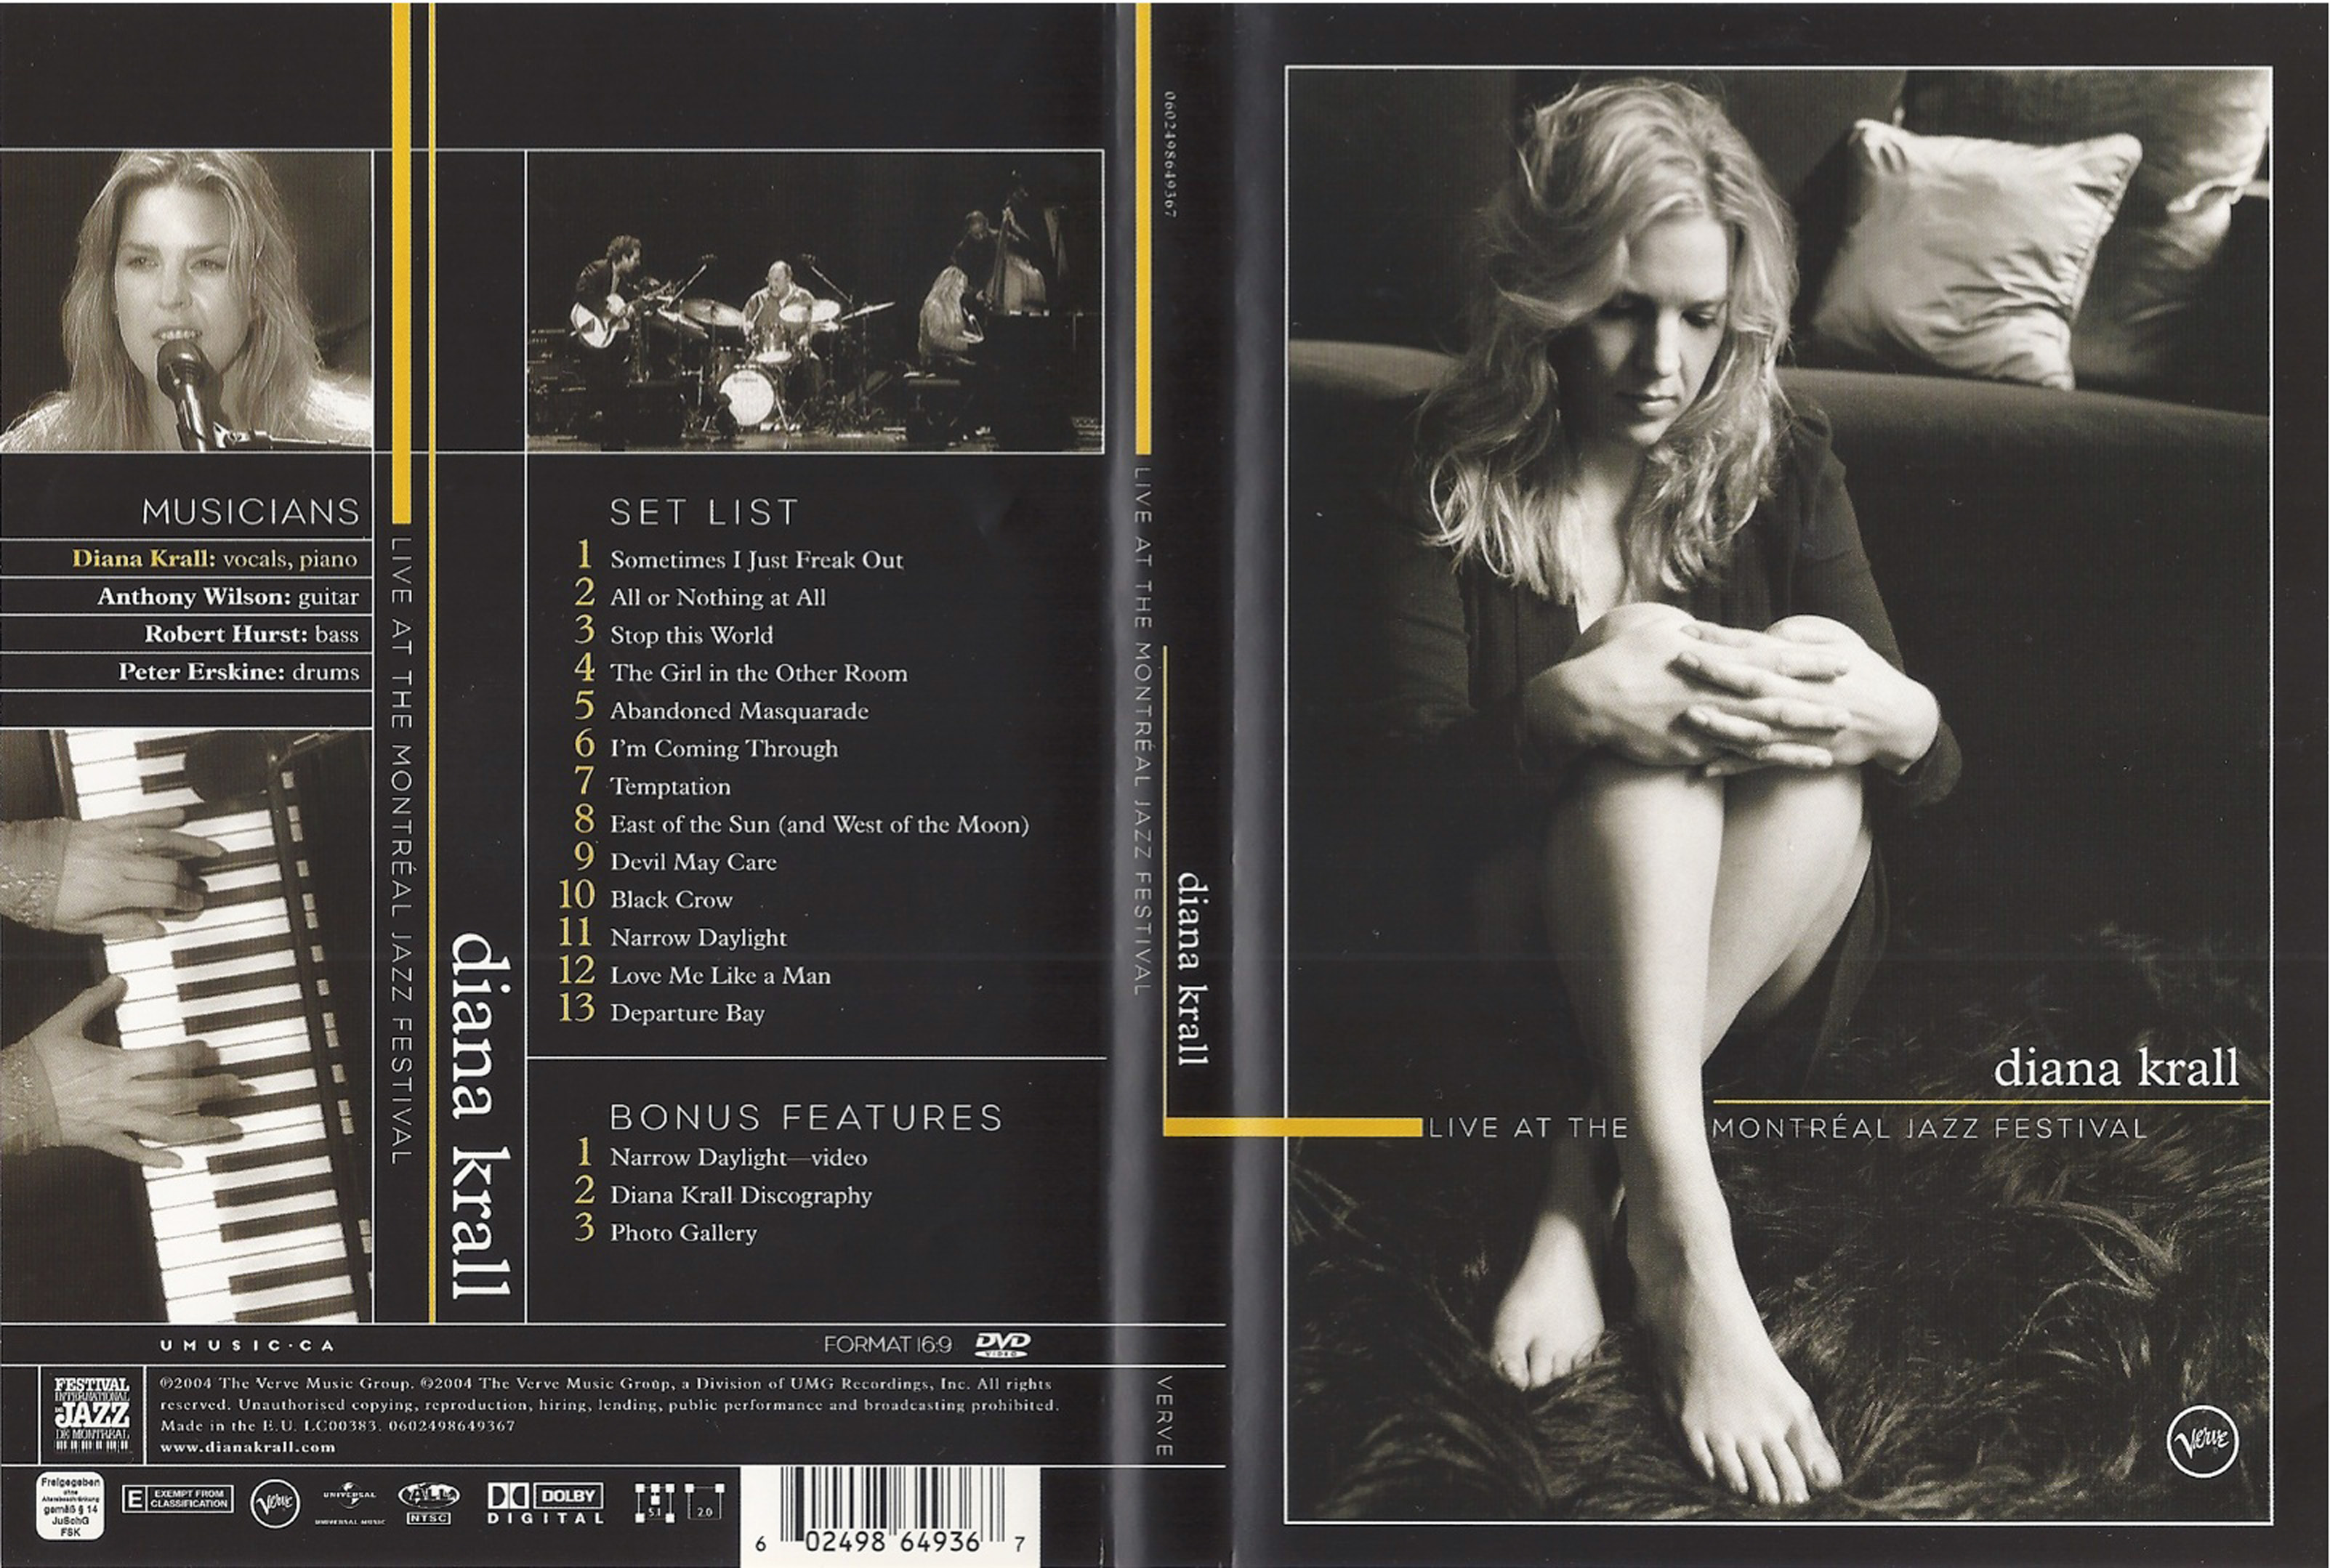 Jaquette DVD Diana Krall Live in Montreal